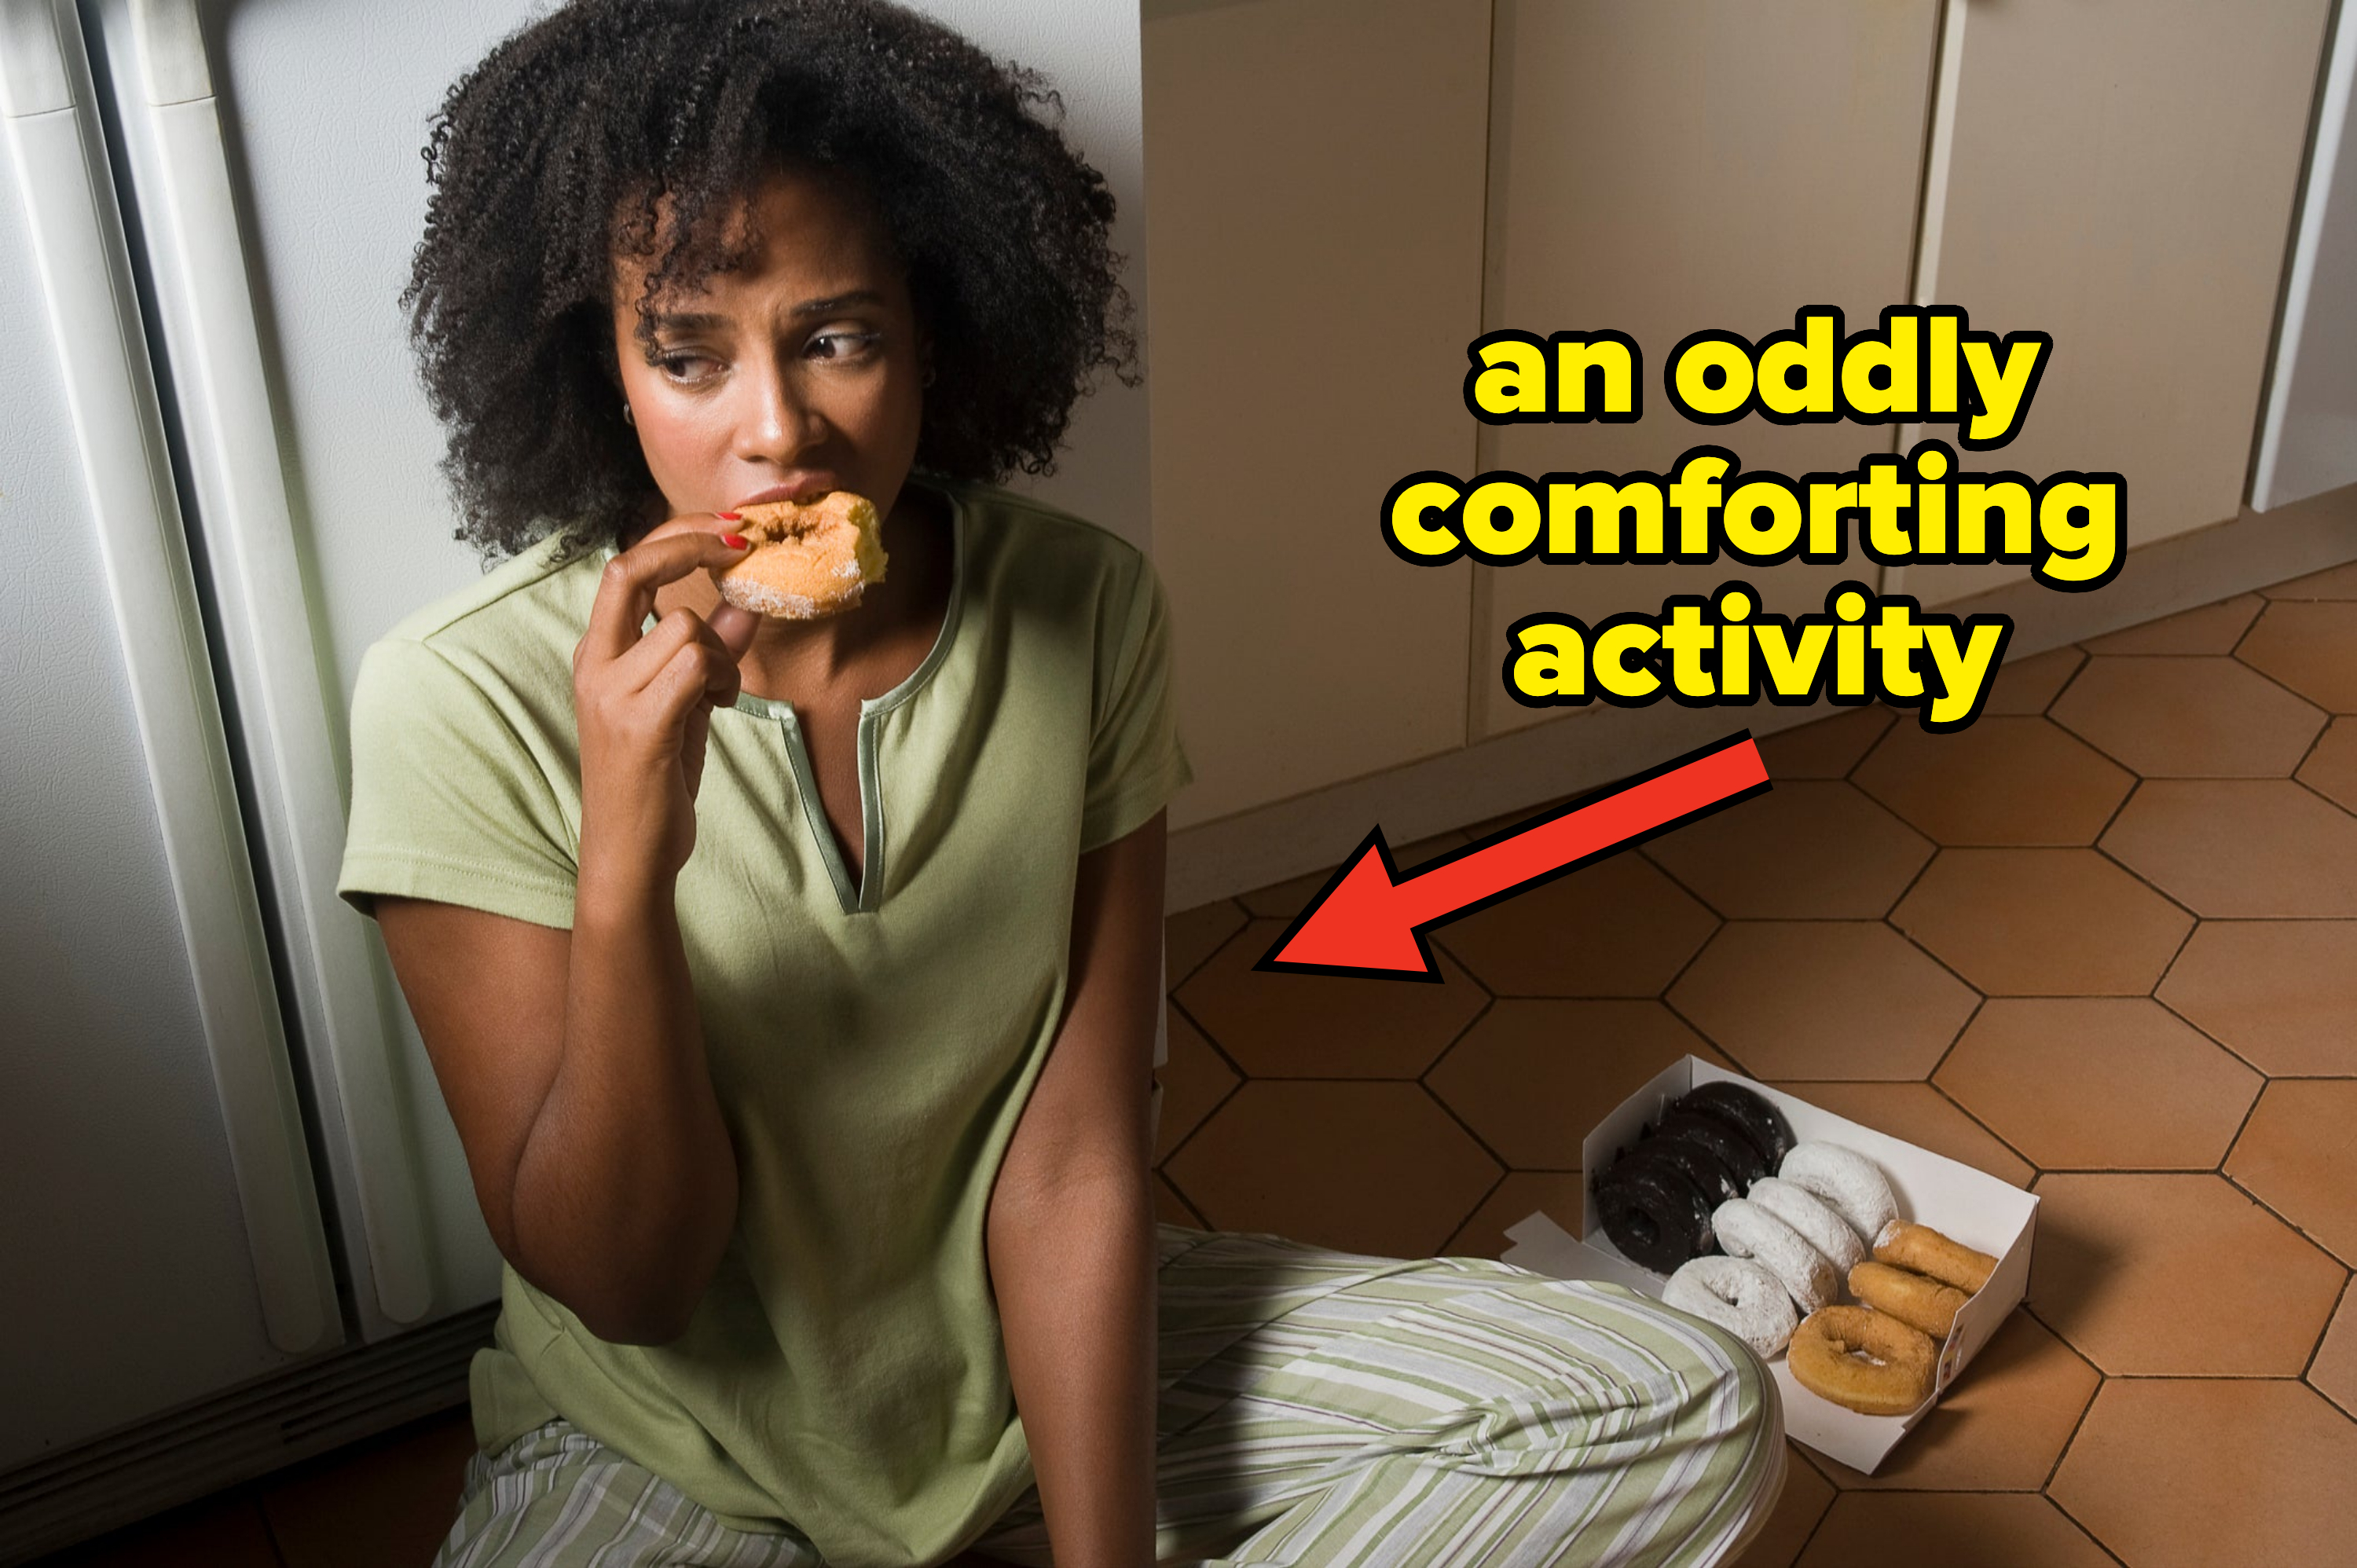 Person sitting on floor eating a cookie, box of assorted cookies nearby